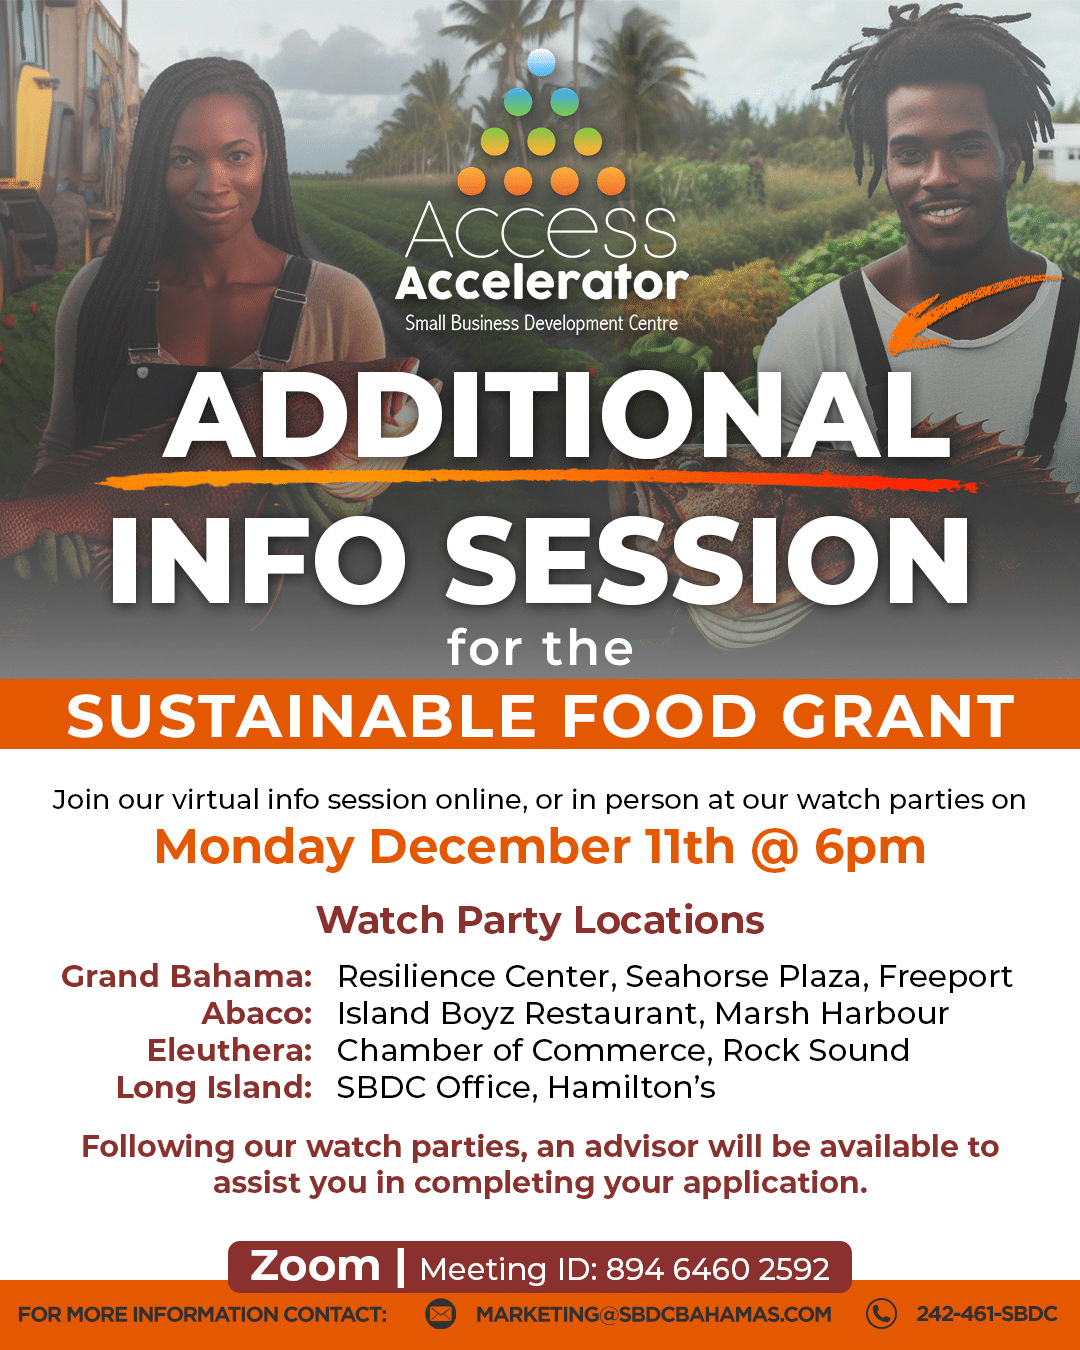 Additional Info Session for the Sustainable Food Grant graphic flier